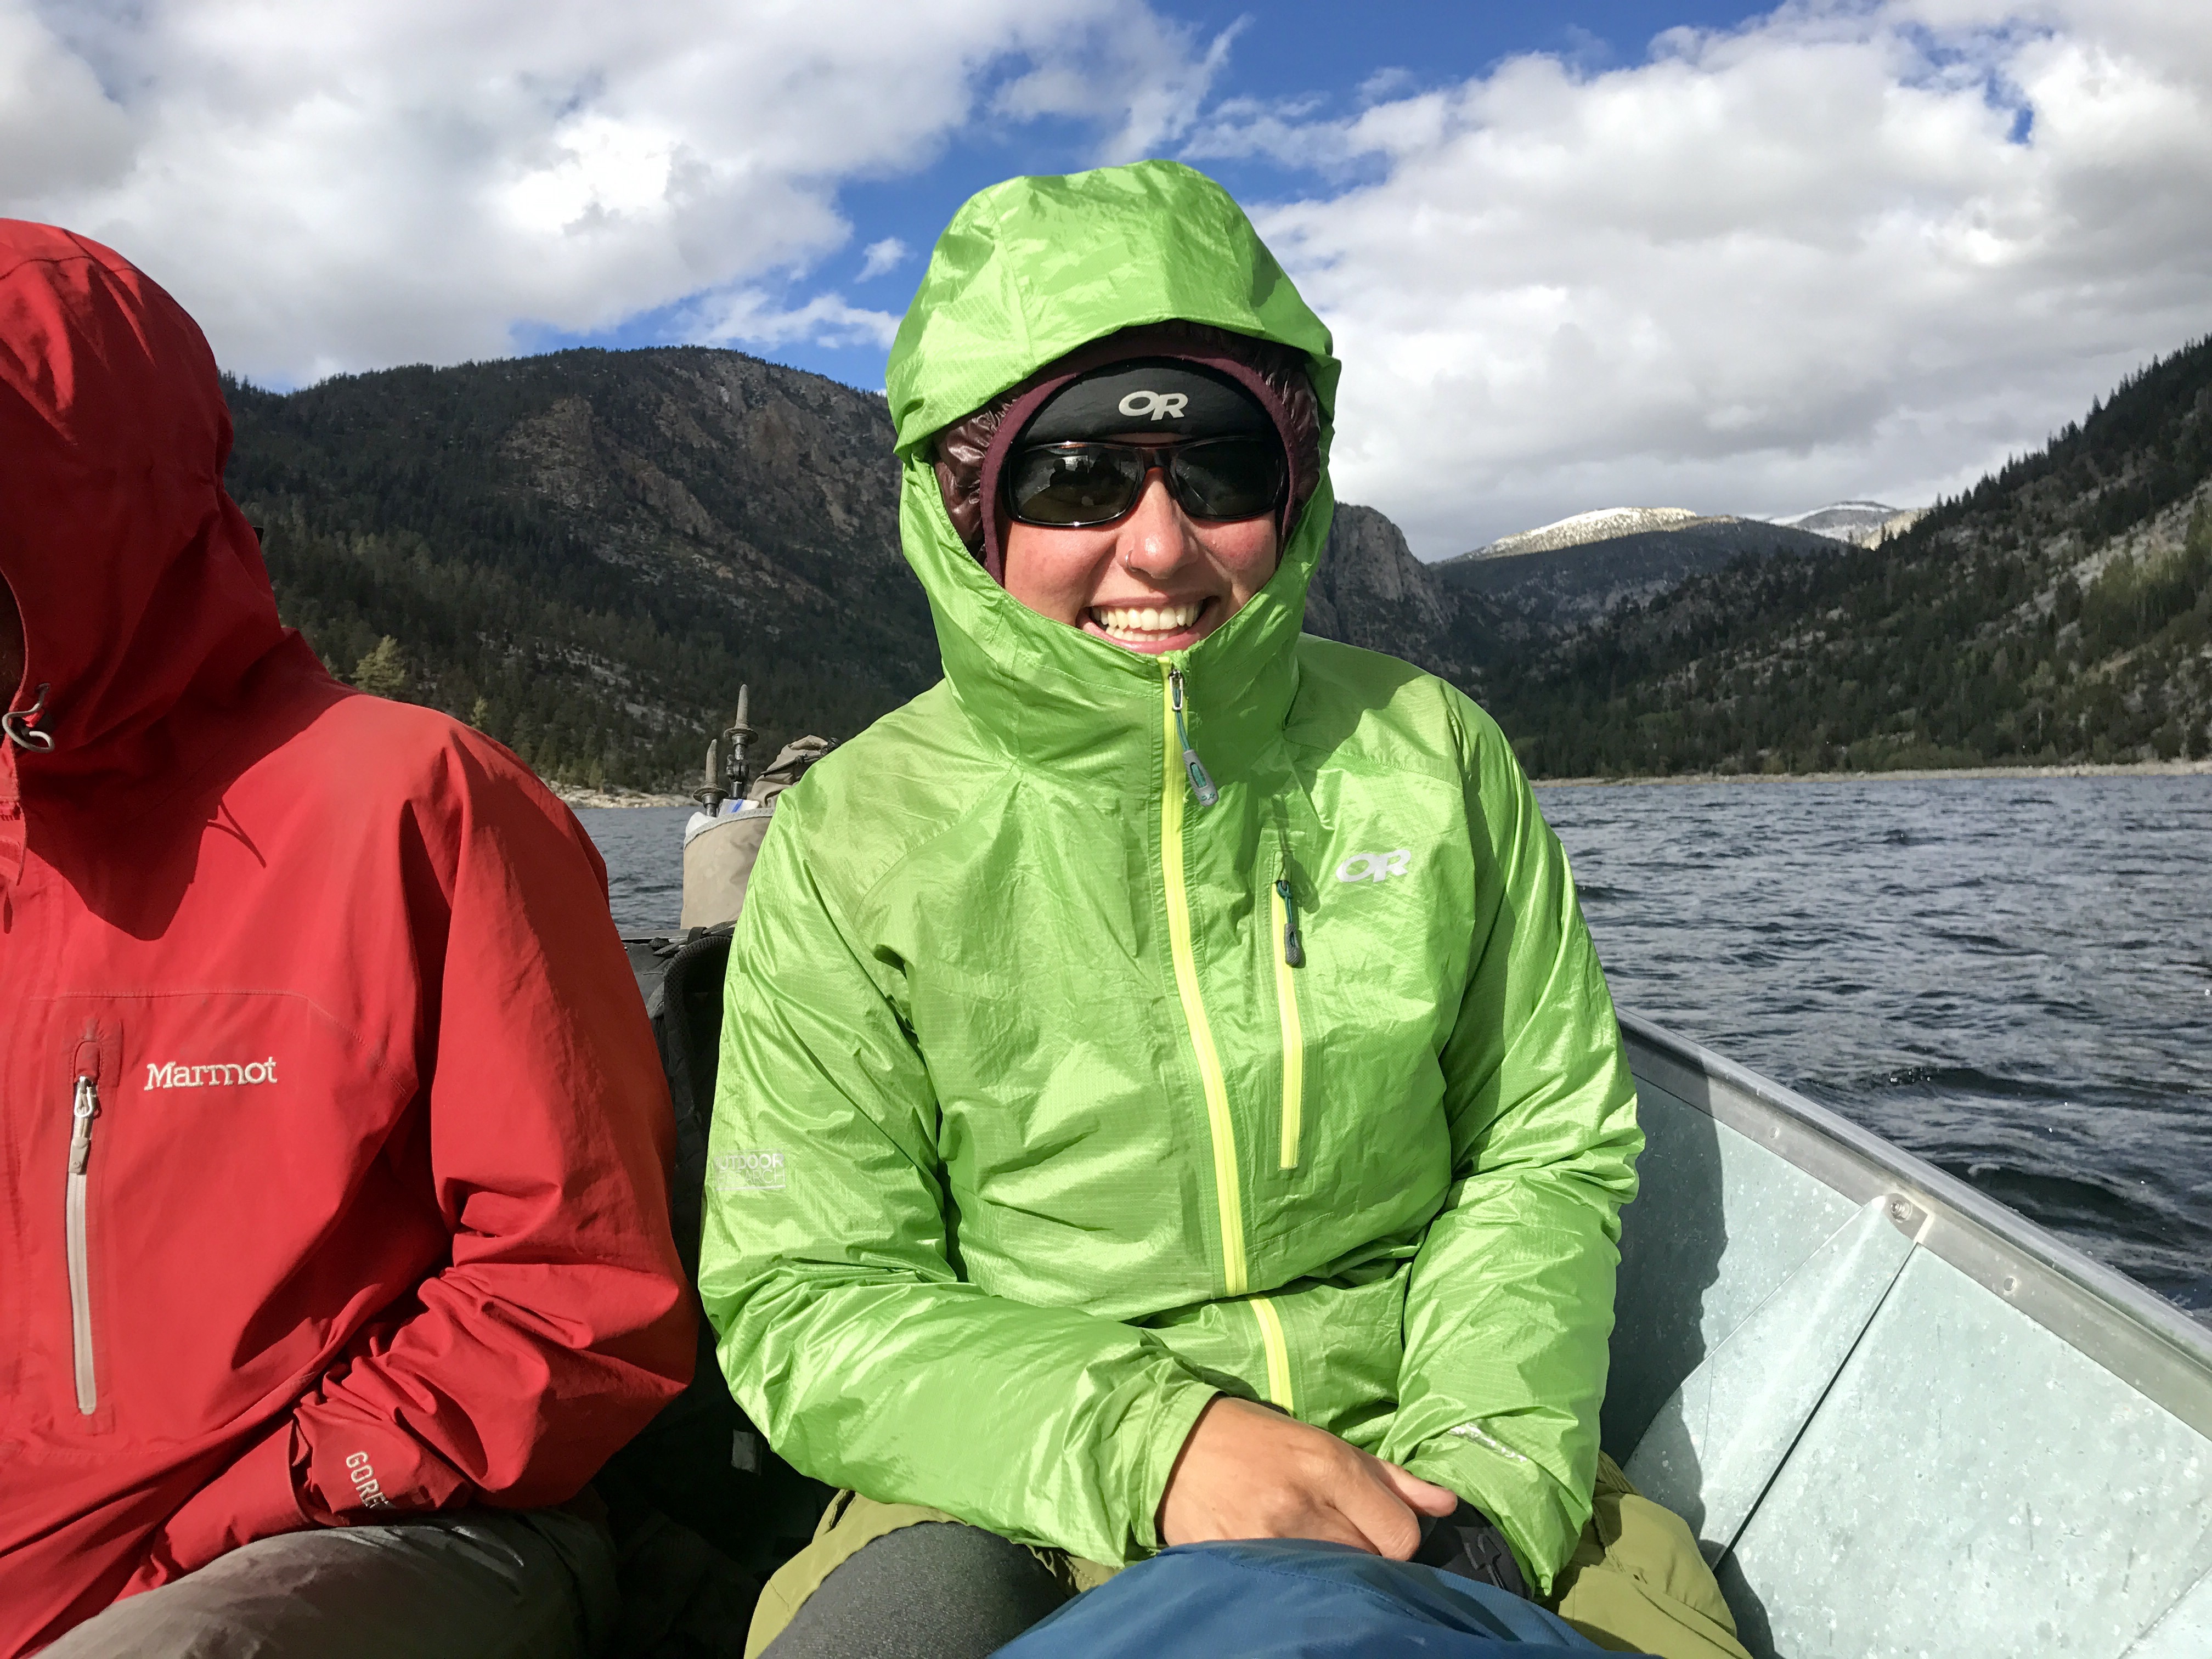 PCT Day 162 – Staying Warm at Vermilion Valley Resort